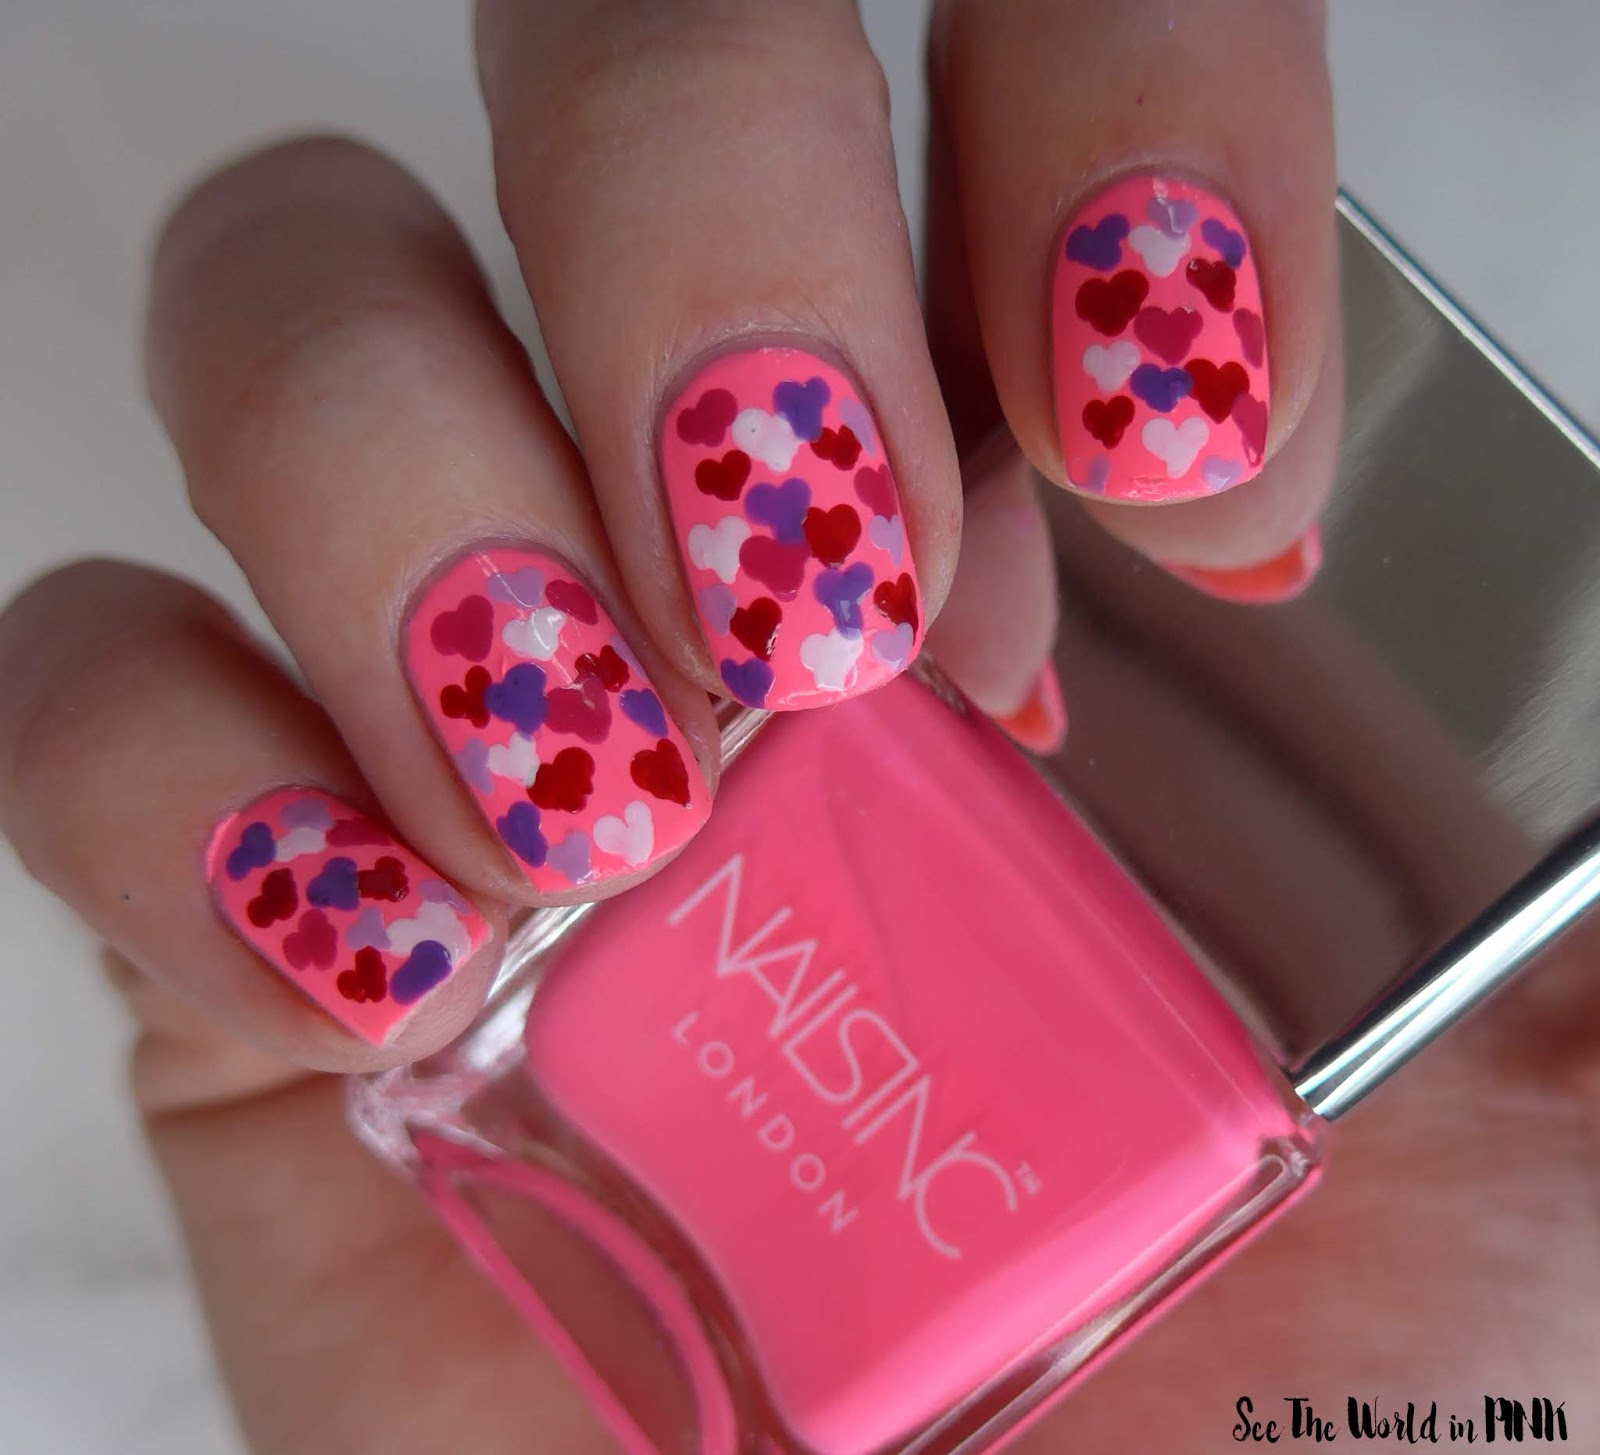 Manicure Monday - Neon Pink Heart Nails